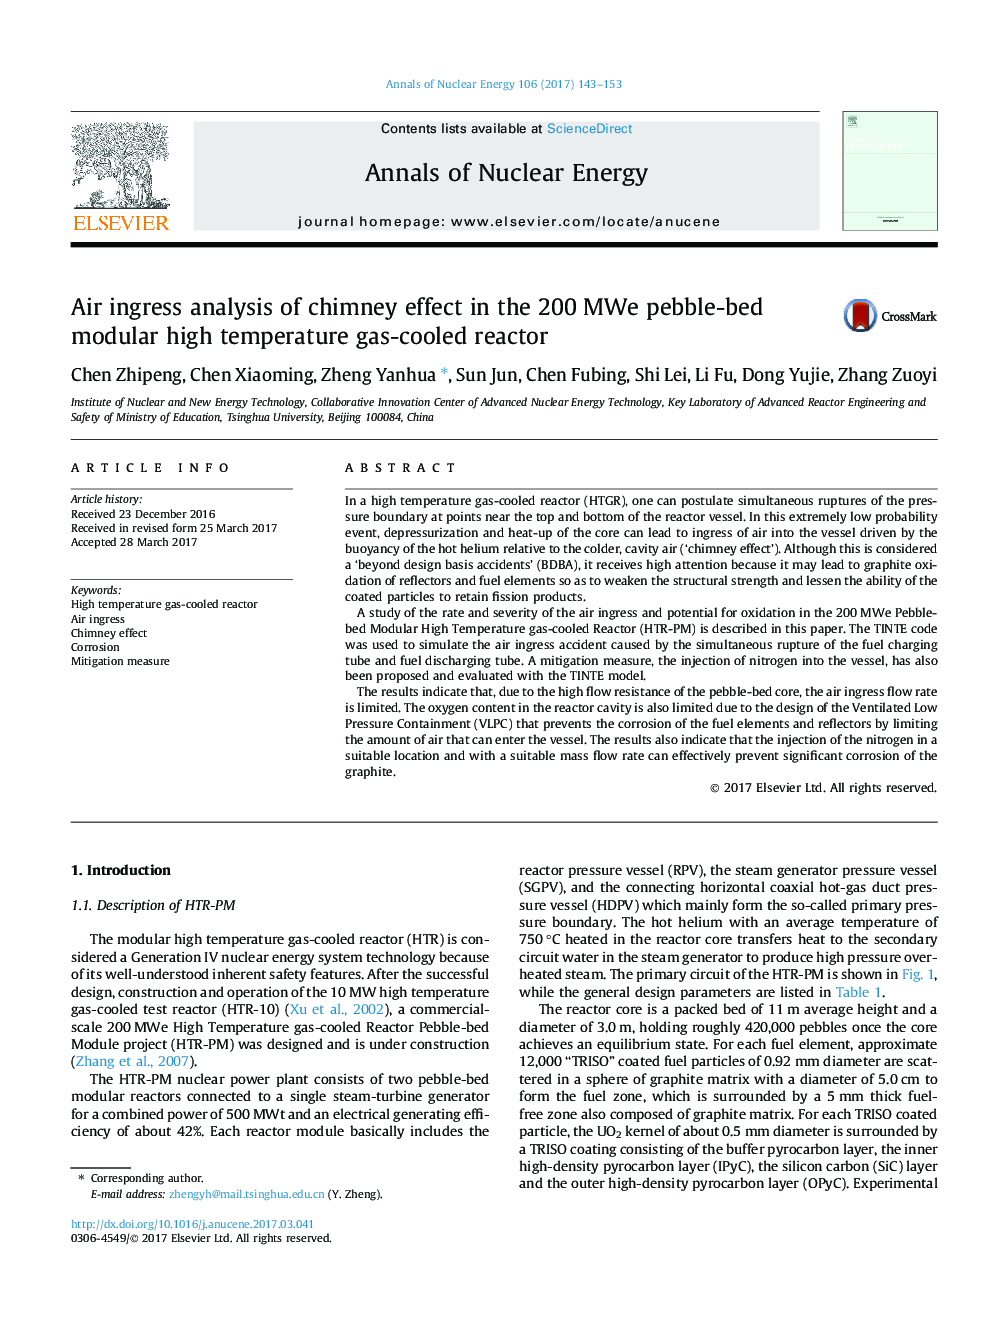 Air ingress analysis of chimney effect in the 200Â MWe pebble-bed modular high temperature gas-cooled reactor